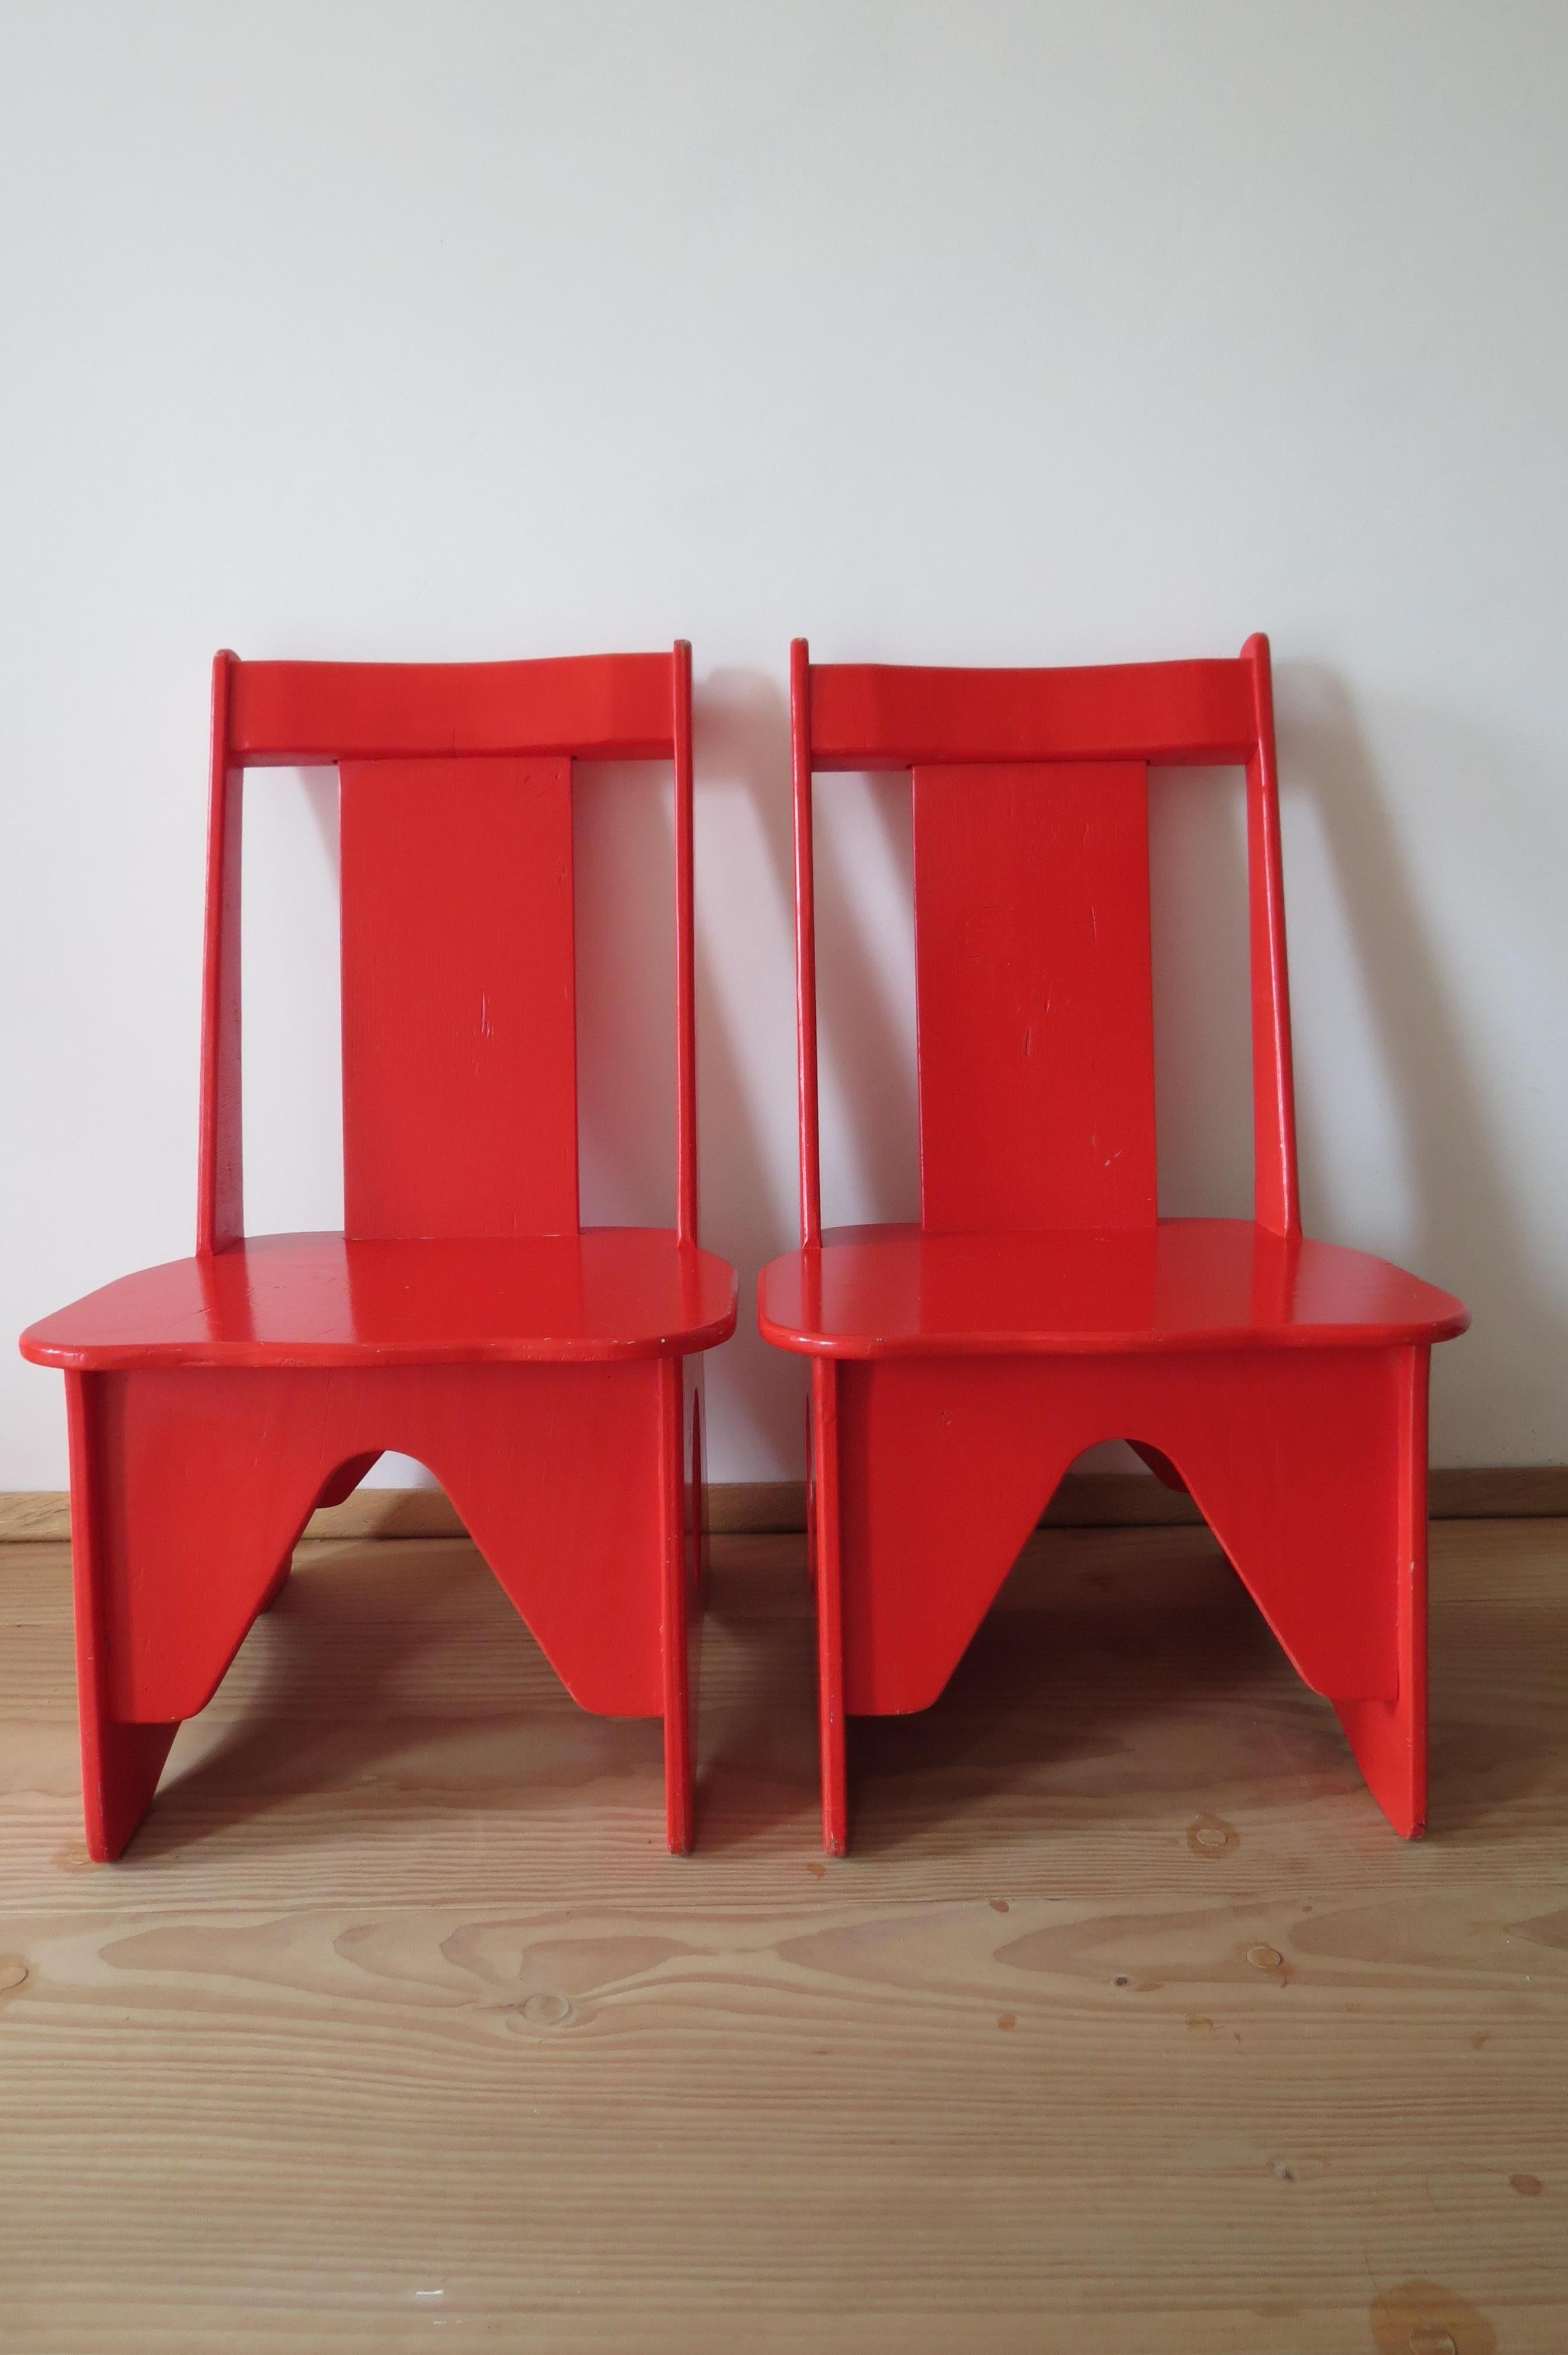 Pair of children's chairs from the 1960s.
Possibly Finnish in design and manufacture.
Retains original red spray paint finish.
Some distressing over all consistent with use, this adds to their over all charm, they remain in good vintage condition.